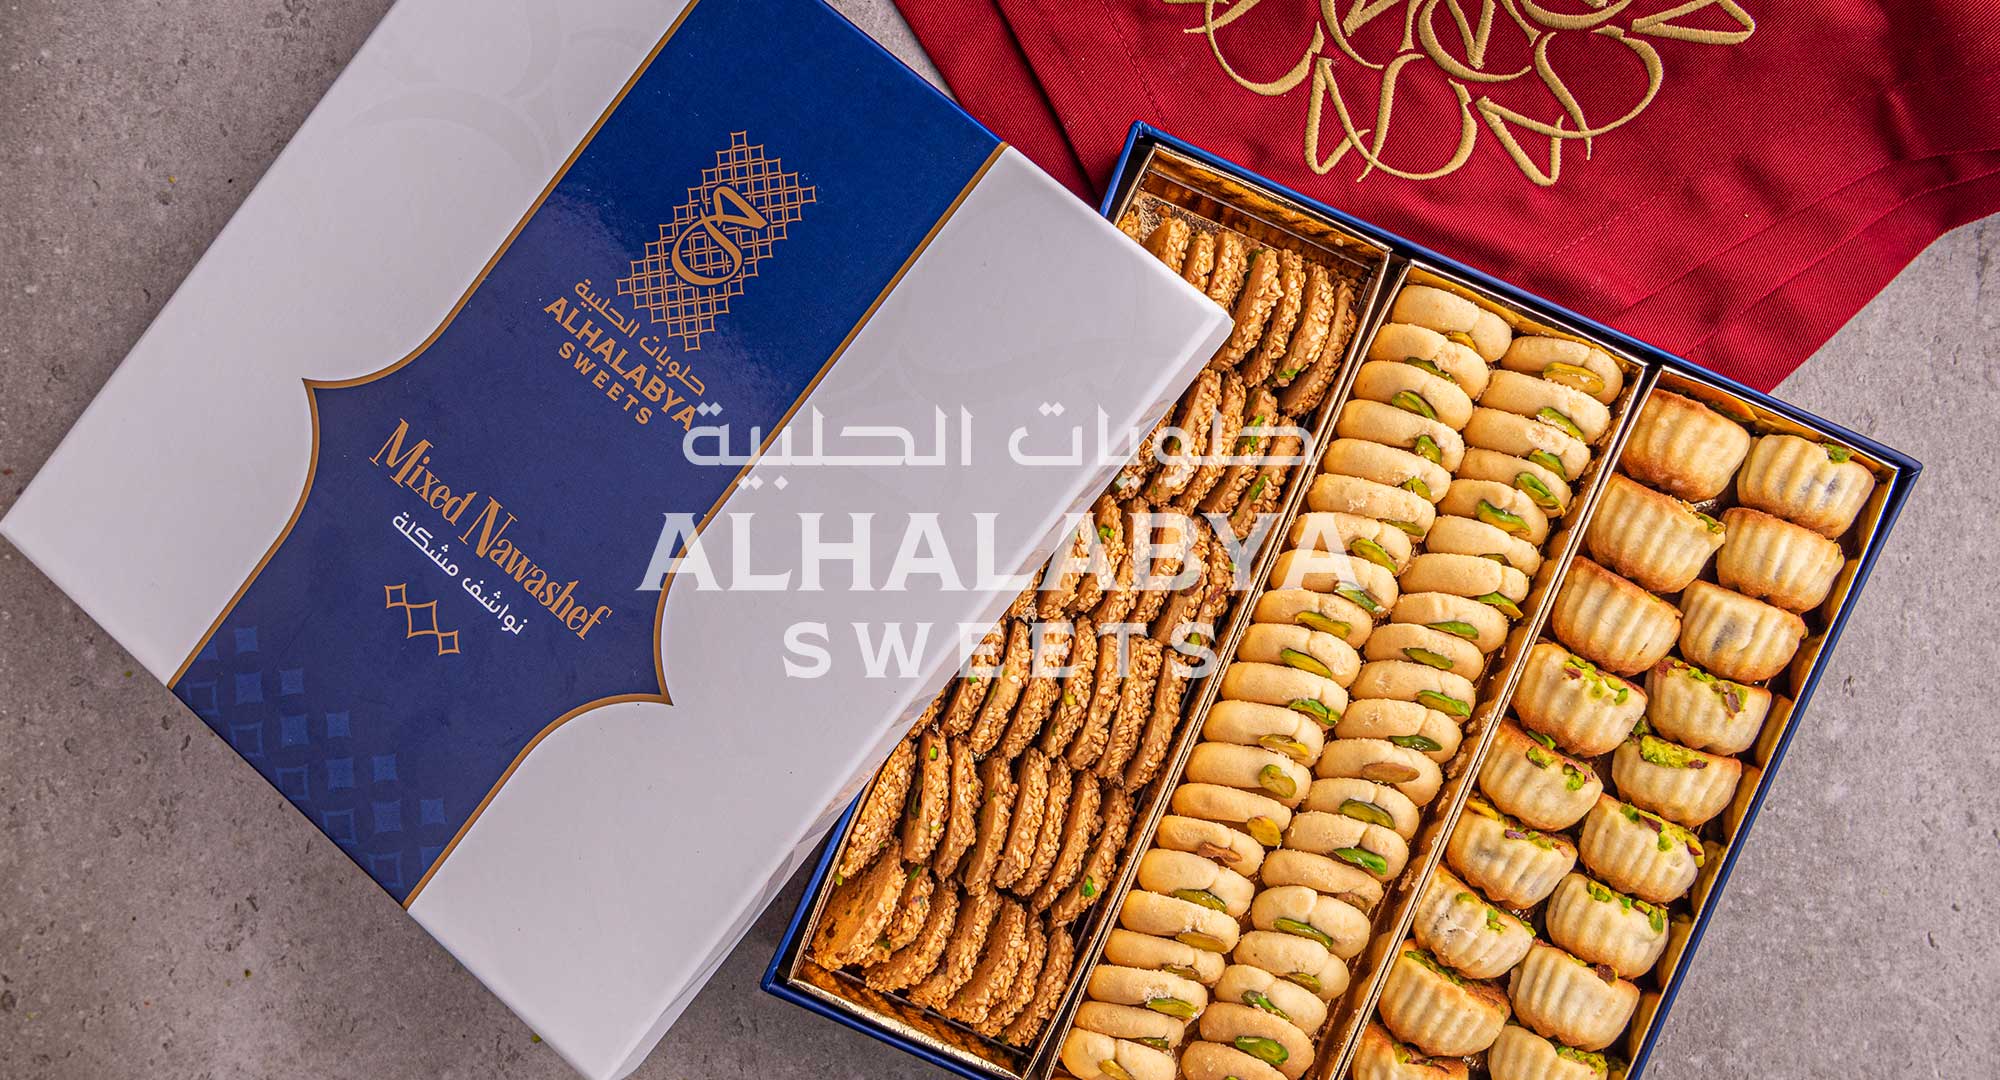 Why Al Halabya Sweets Stands Out in Dubai